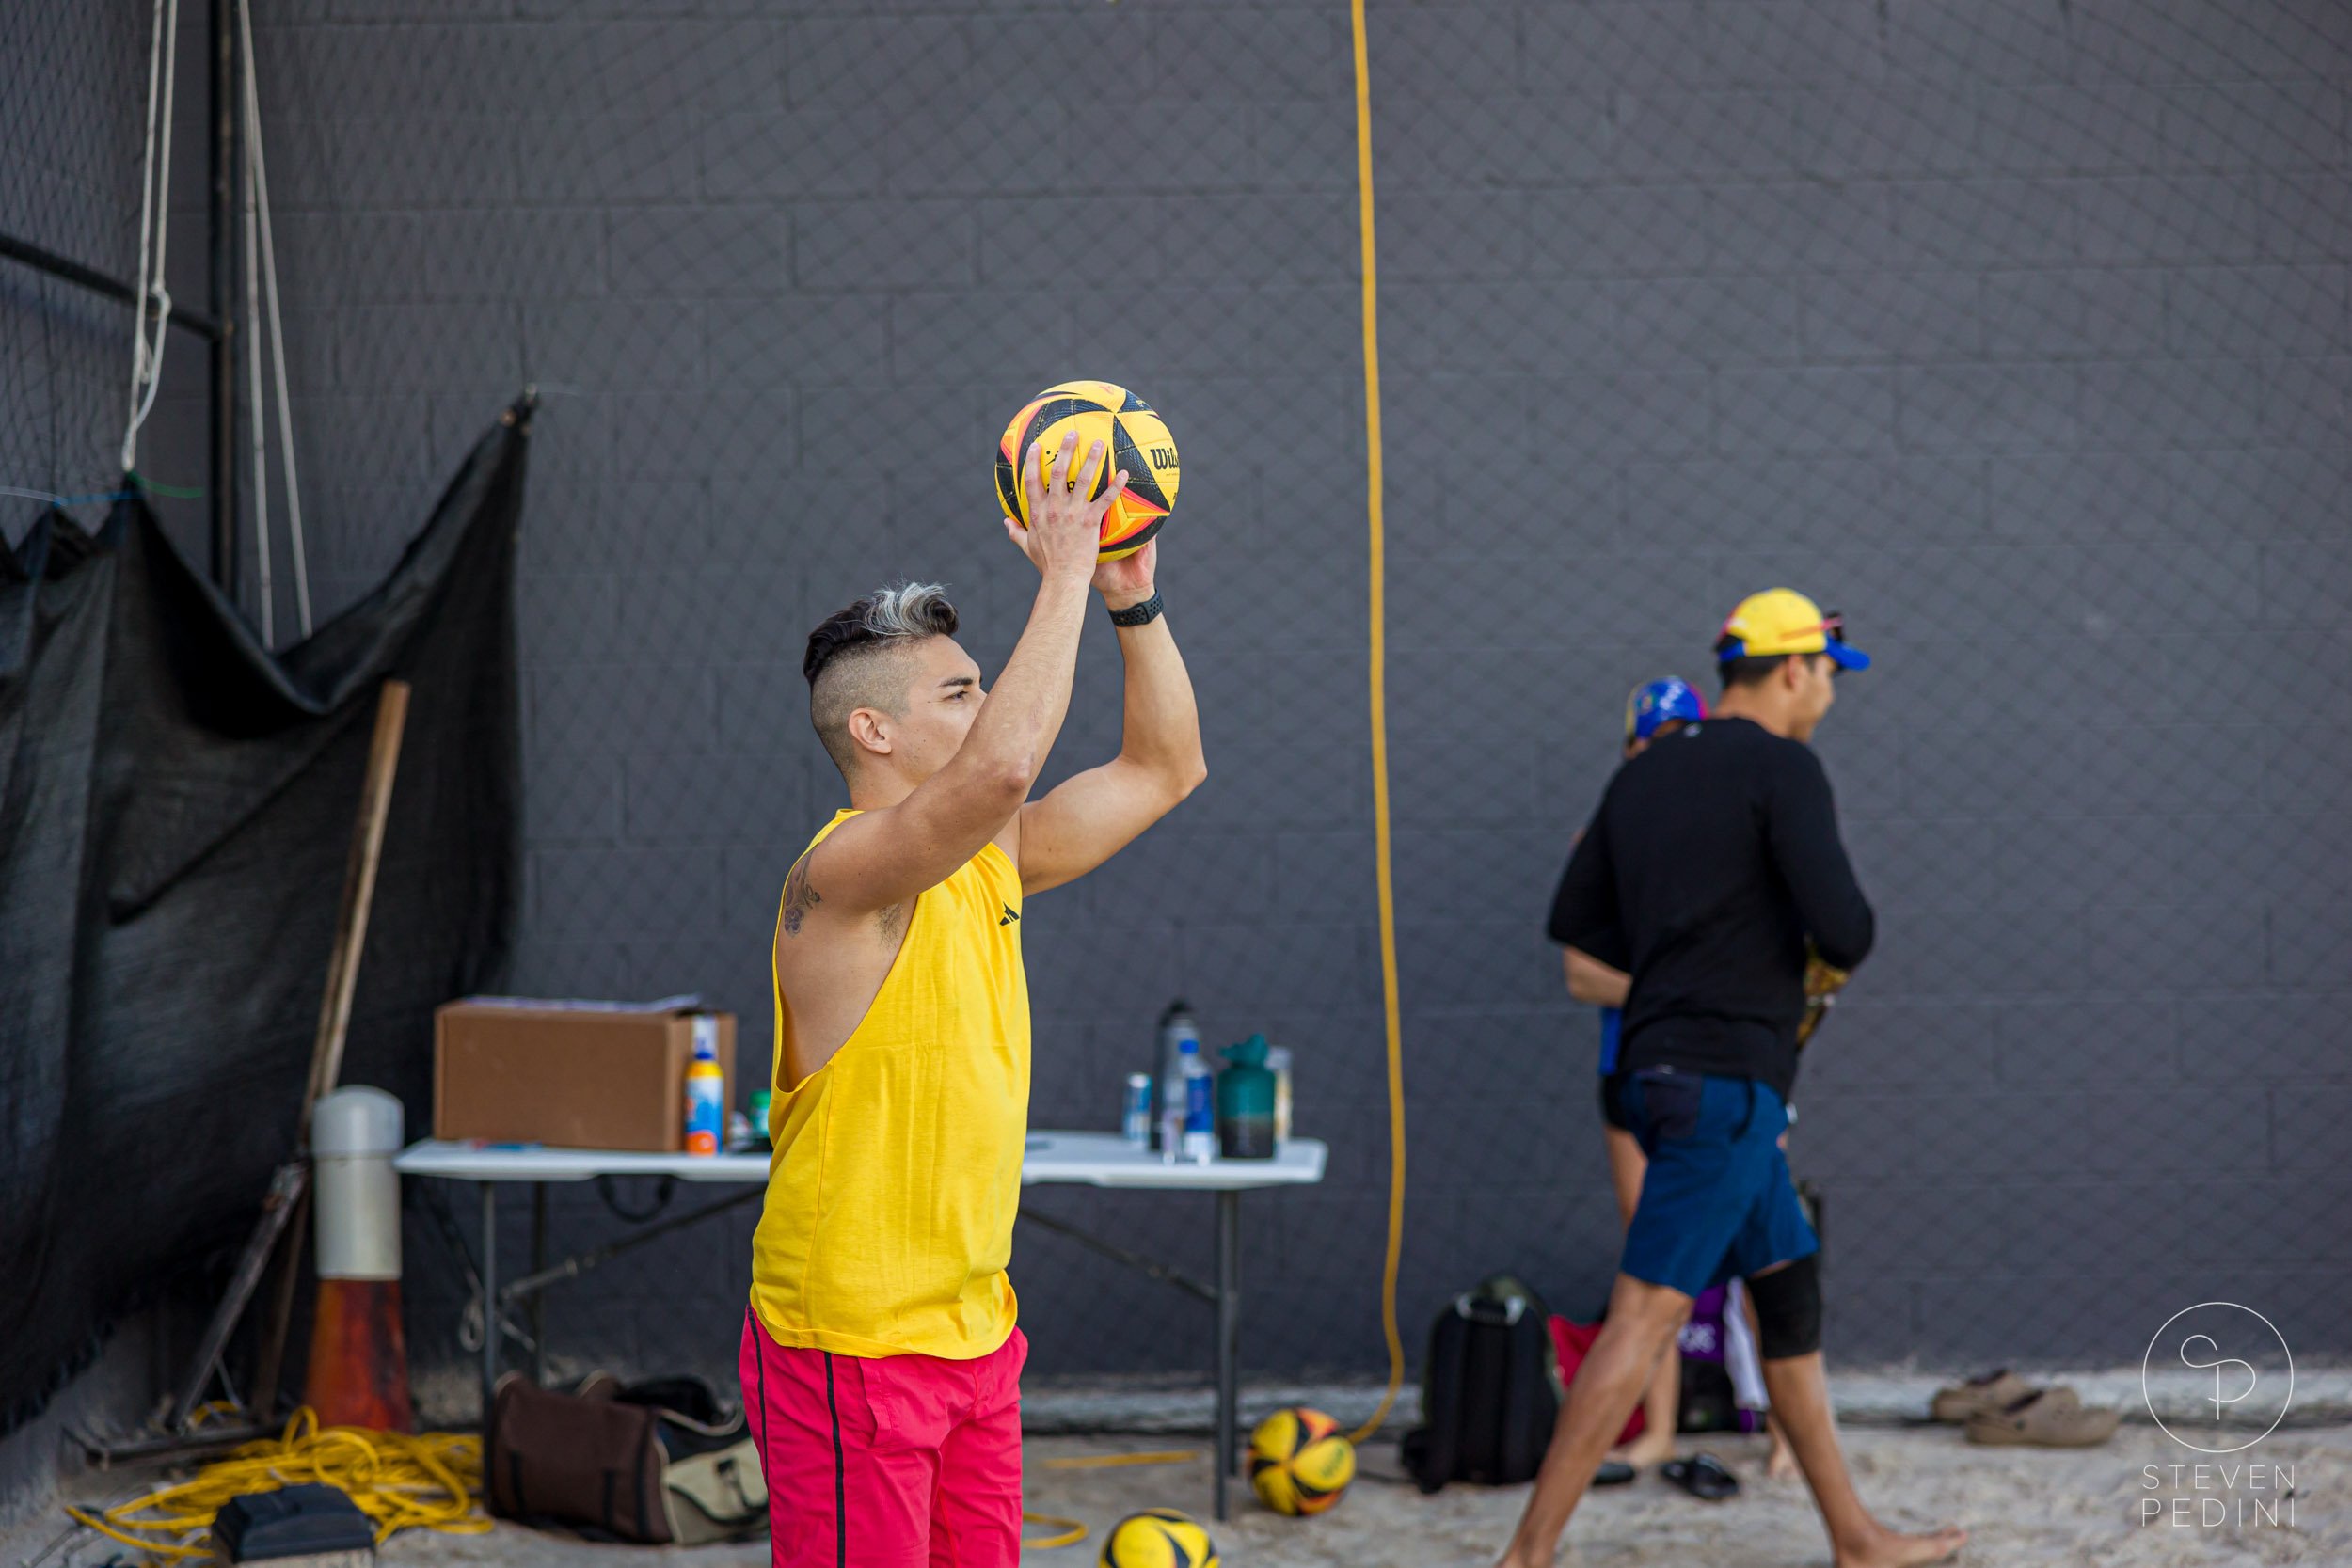 Steven Pedini Photography - Bumpy Pickle - Sand Volleyball - Houston TX - World Cup of Volleyball - 00170.jpg